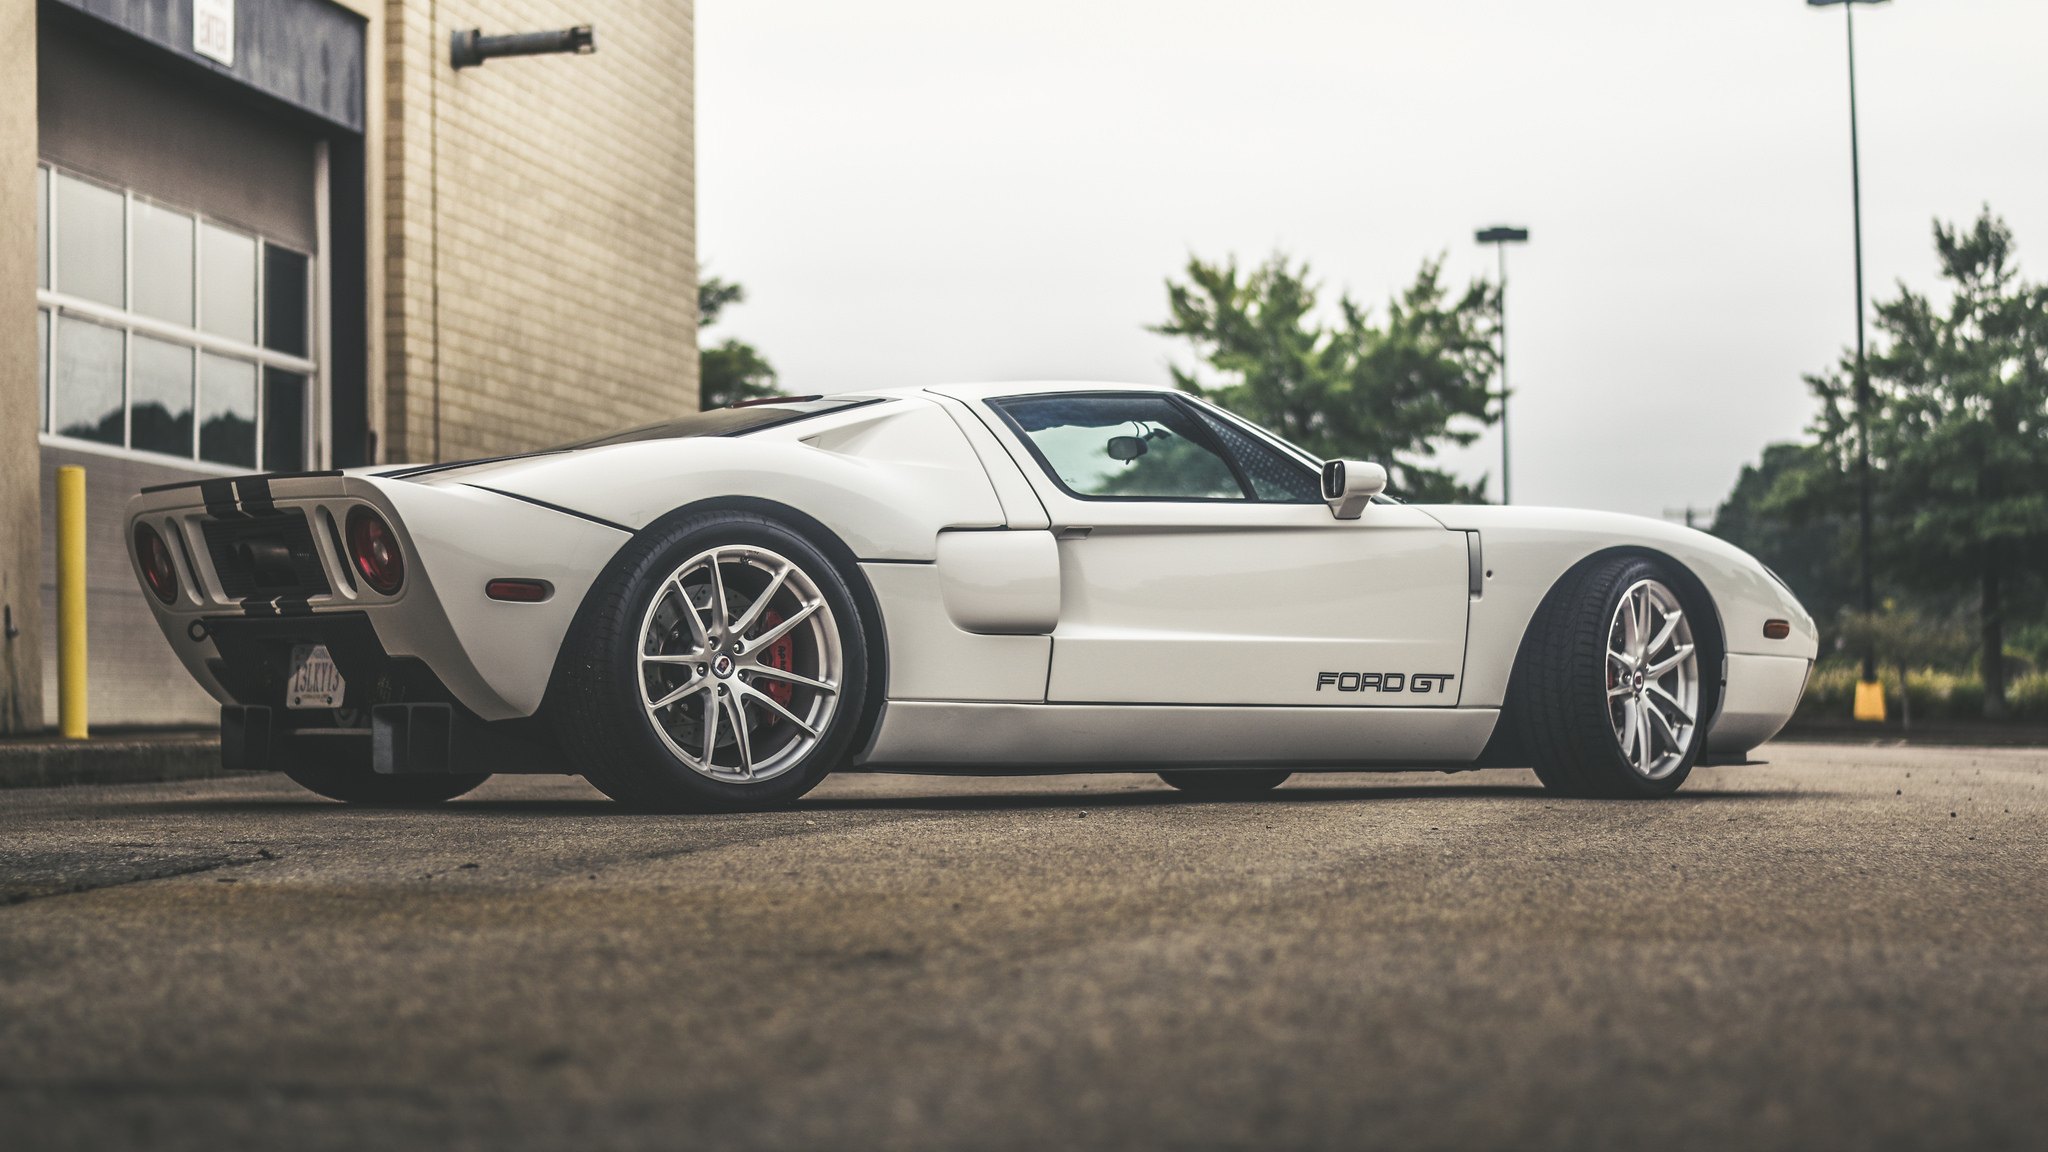 HRE Wheels with Red Brakes on White Ford GT - Photo by HRE Wheels